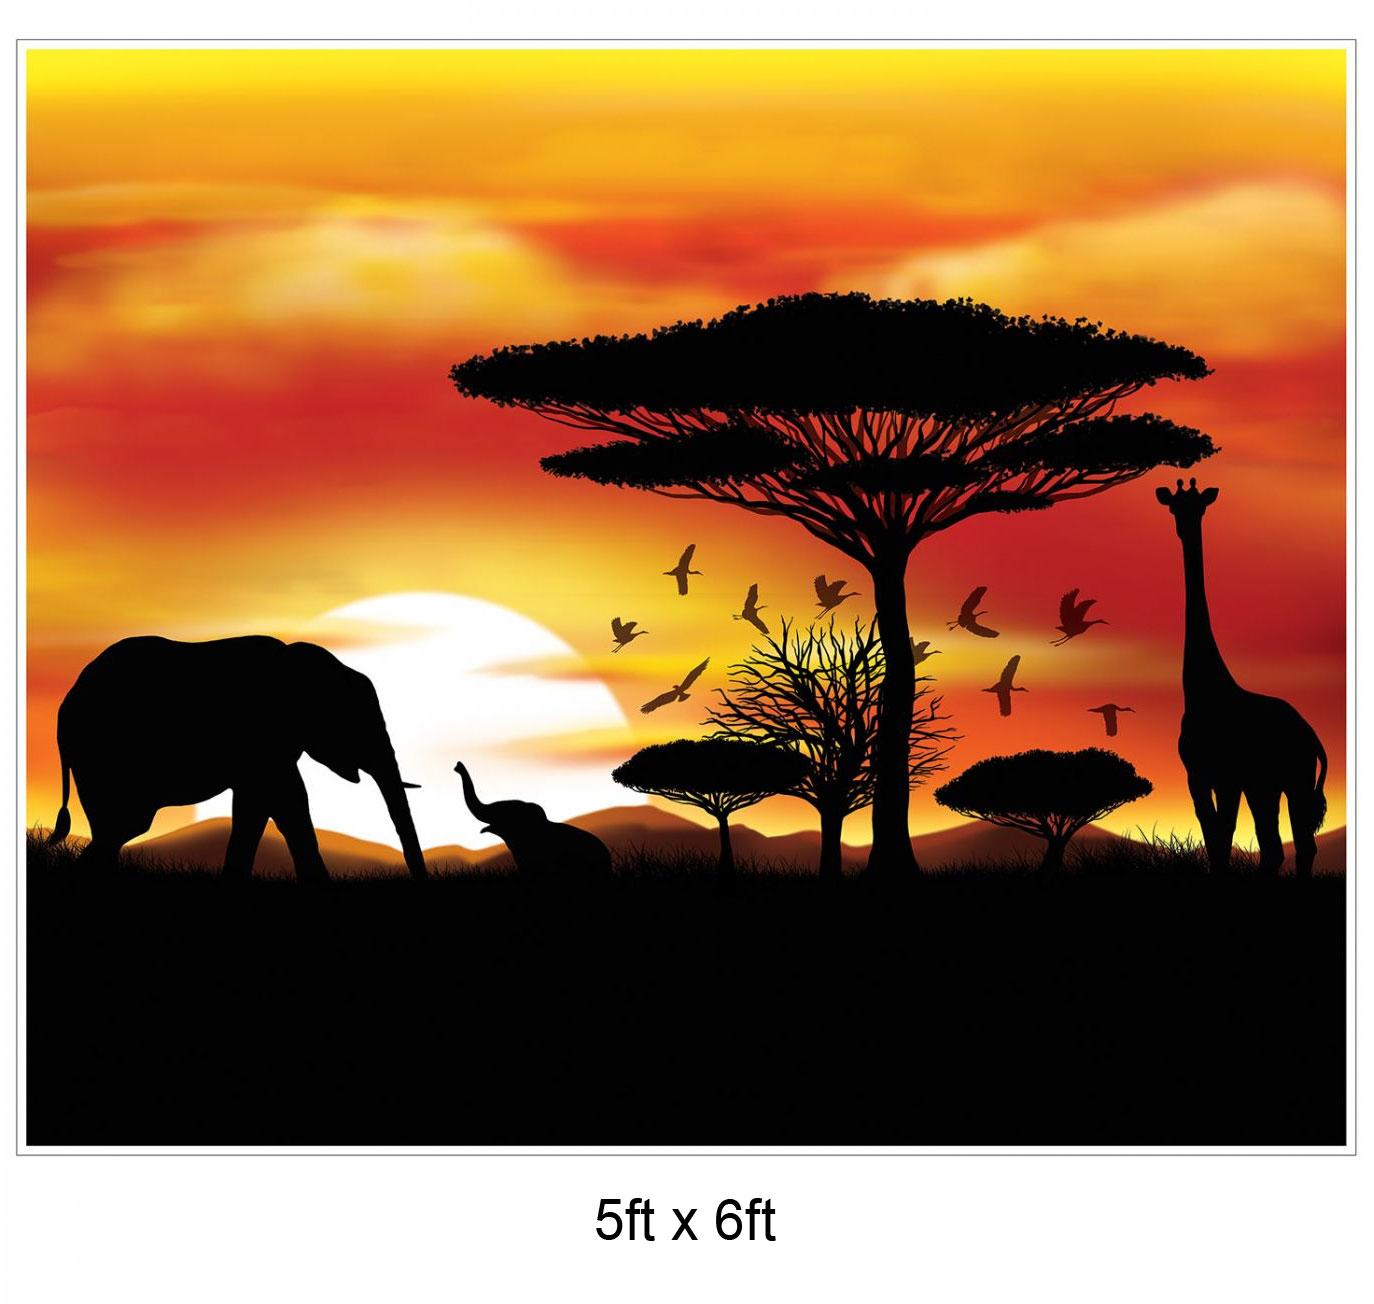 African Safari Insta-Mural - 5ft x 6ft by Beistle 53046 available in the UK here at Karnival Costumes online party shop